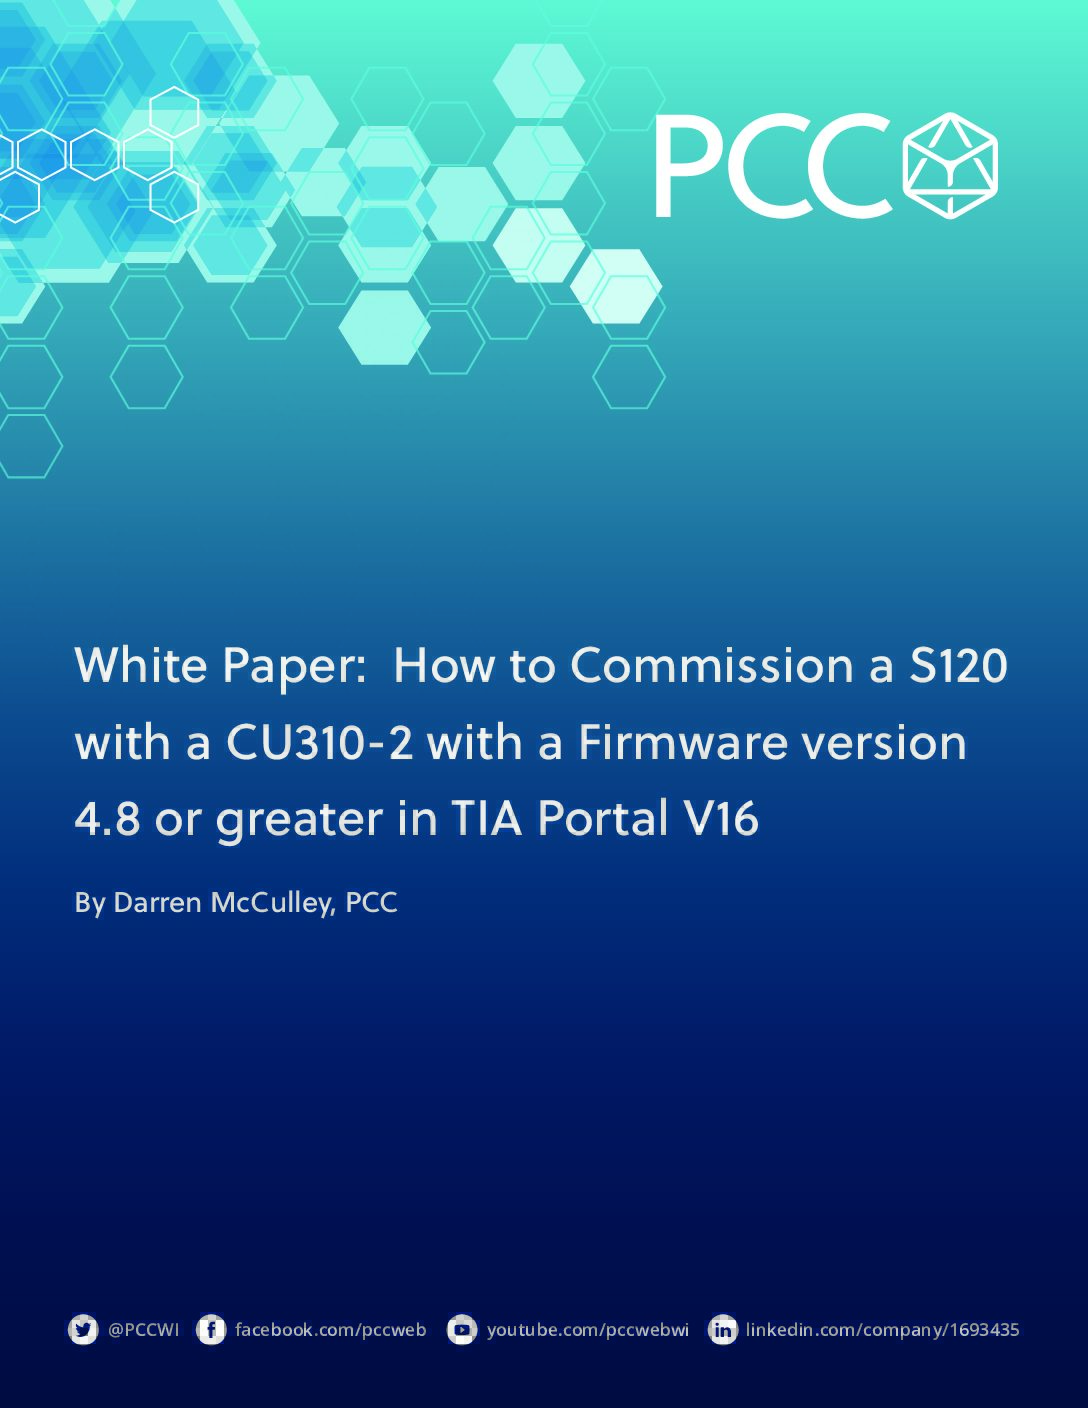 White Paper: How to Commission a S120 with a CU310-2 with a Firmware version 4.8 or greater in TIA Portal V16